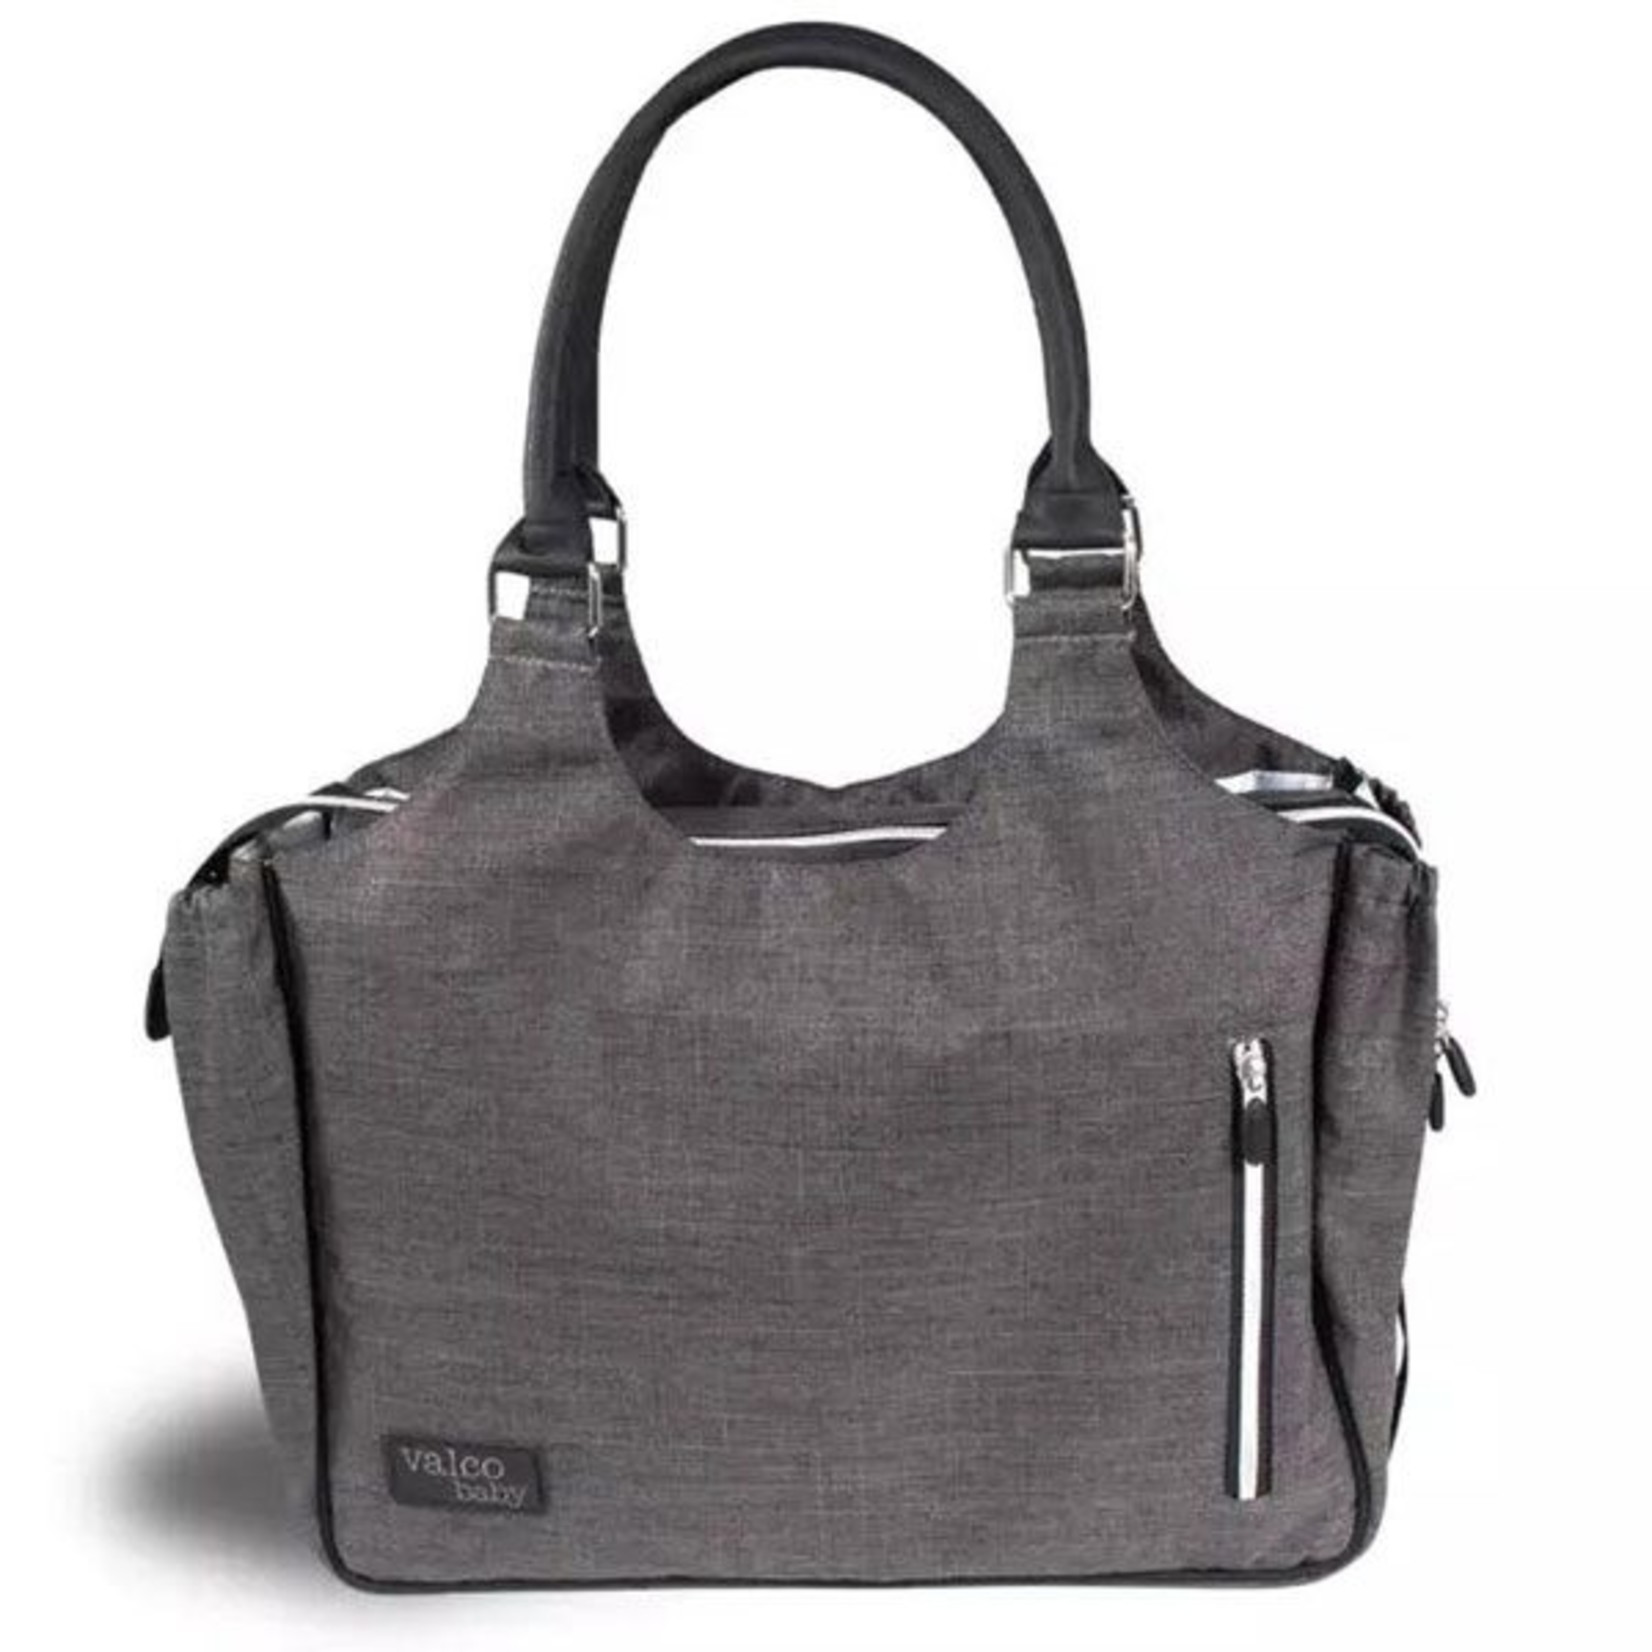 Valco Baby Mothers Bag-Charcoal